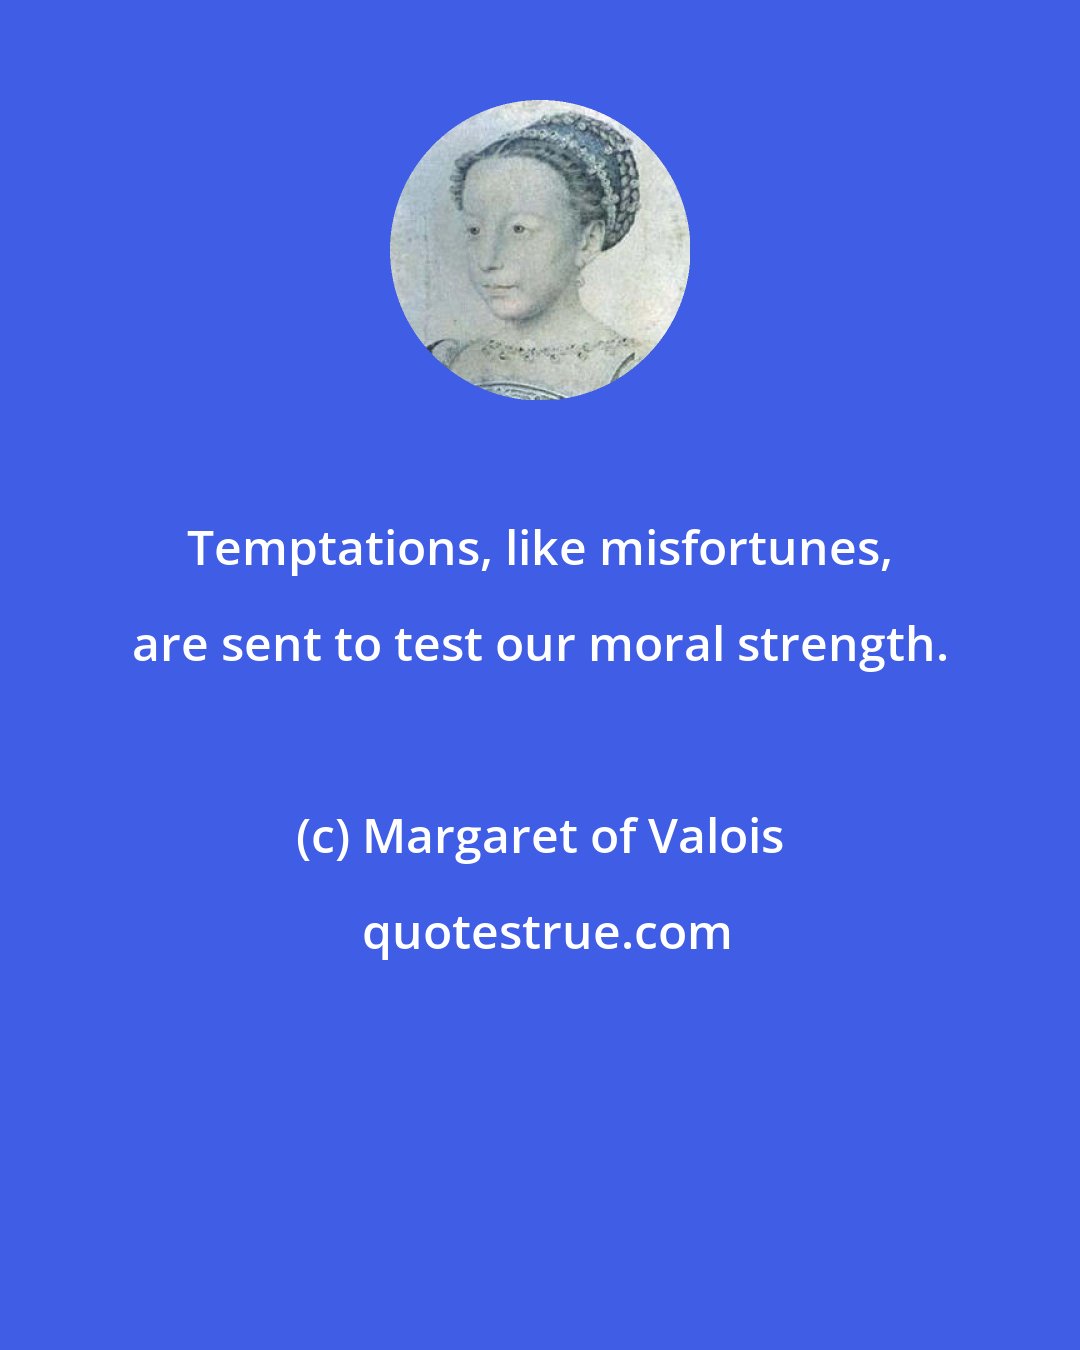 Margaret of Valois: Temptations, like misfortunes, are sent to test our moral strength.